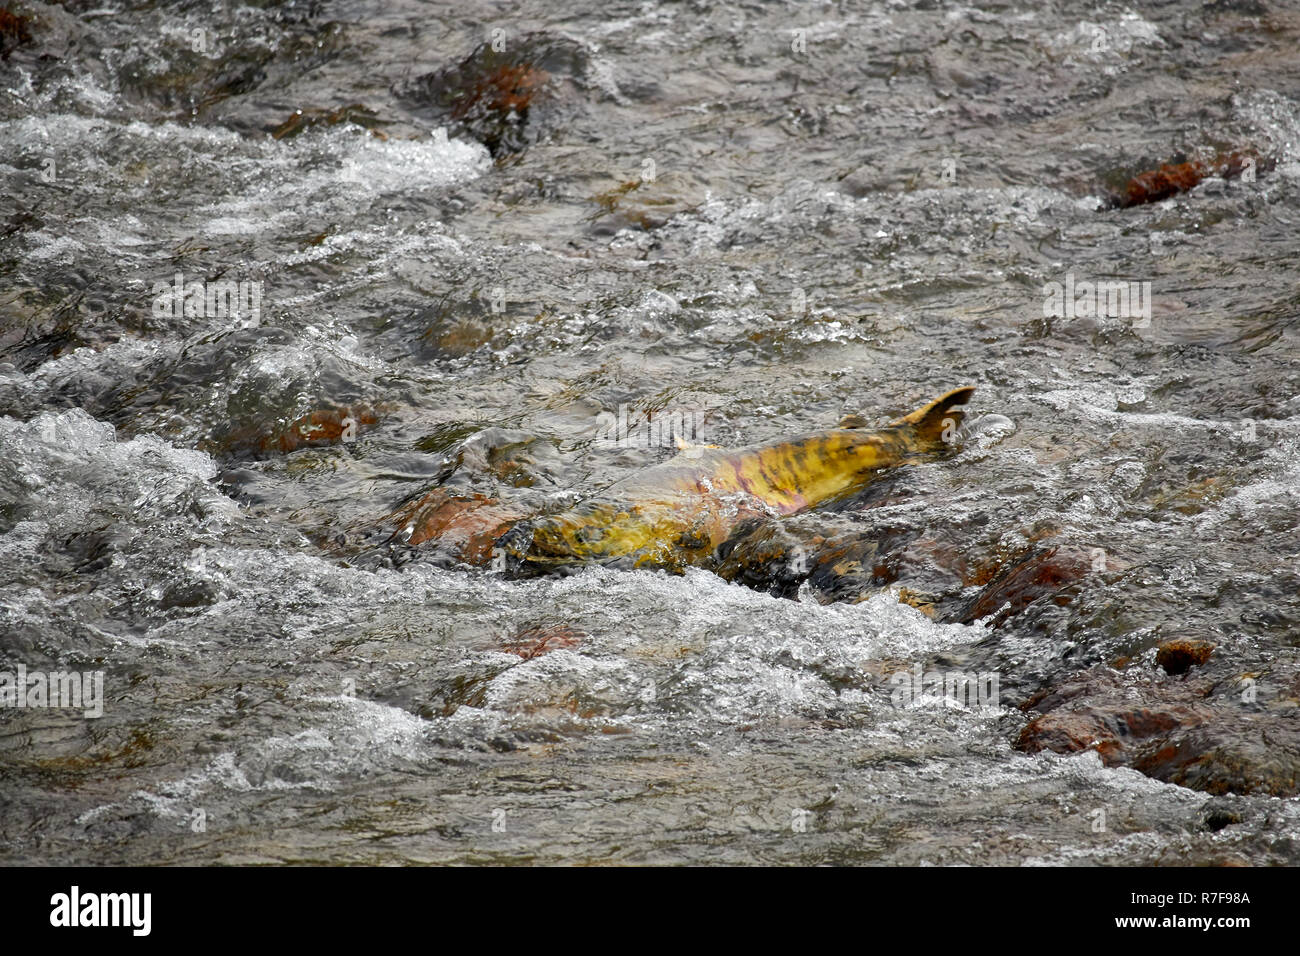 Salmon swimming up the river to spawn, Great Bear Rainforest Stock Photo